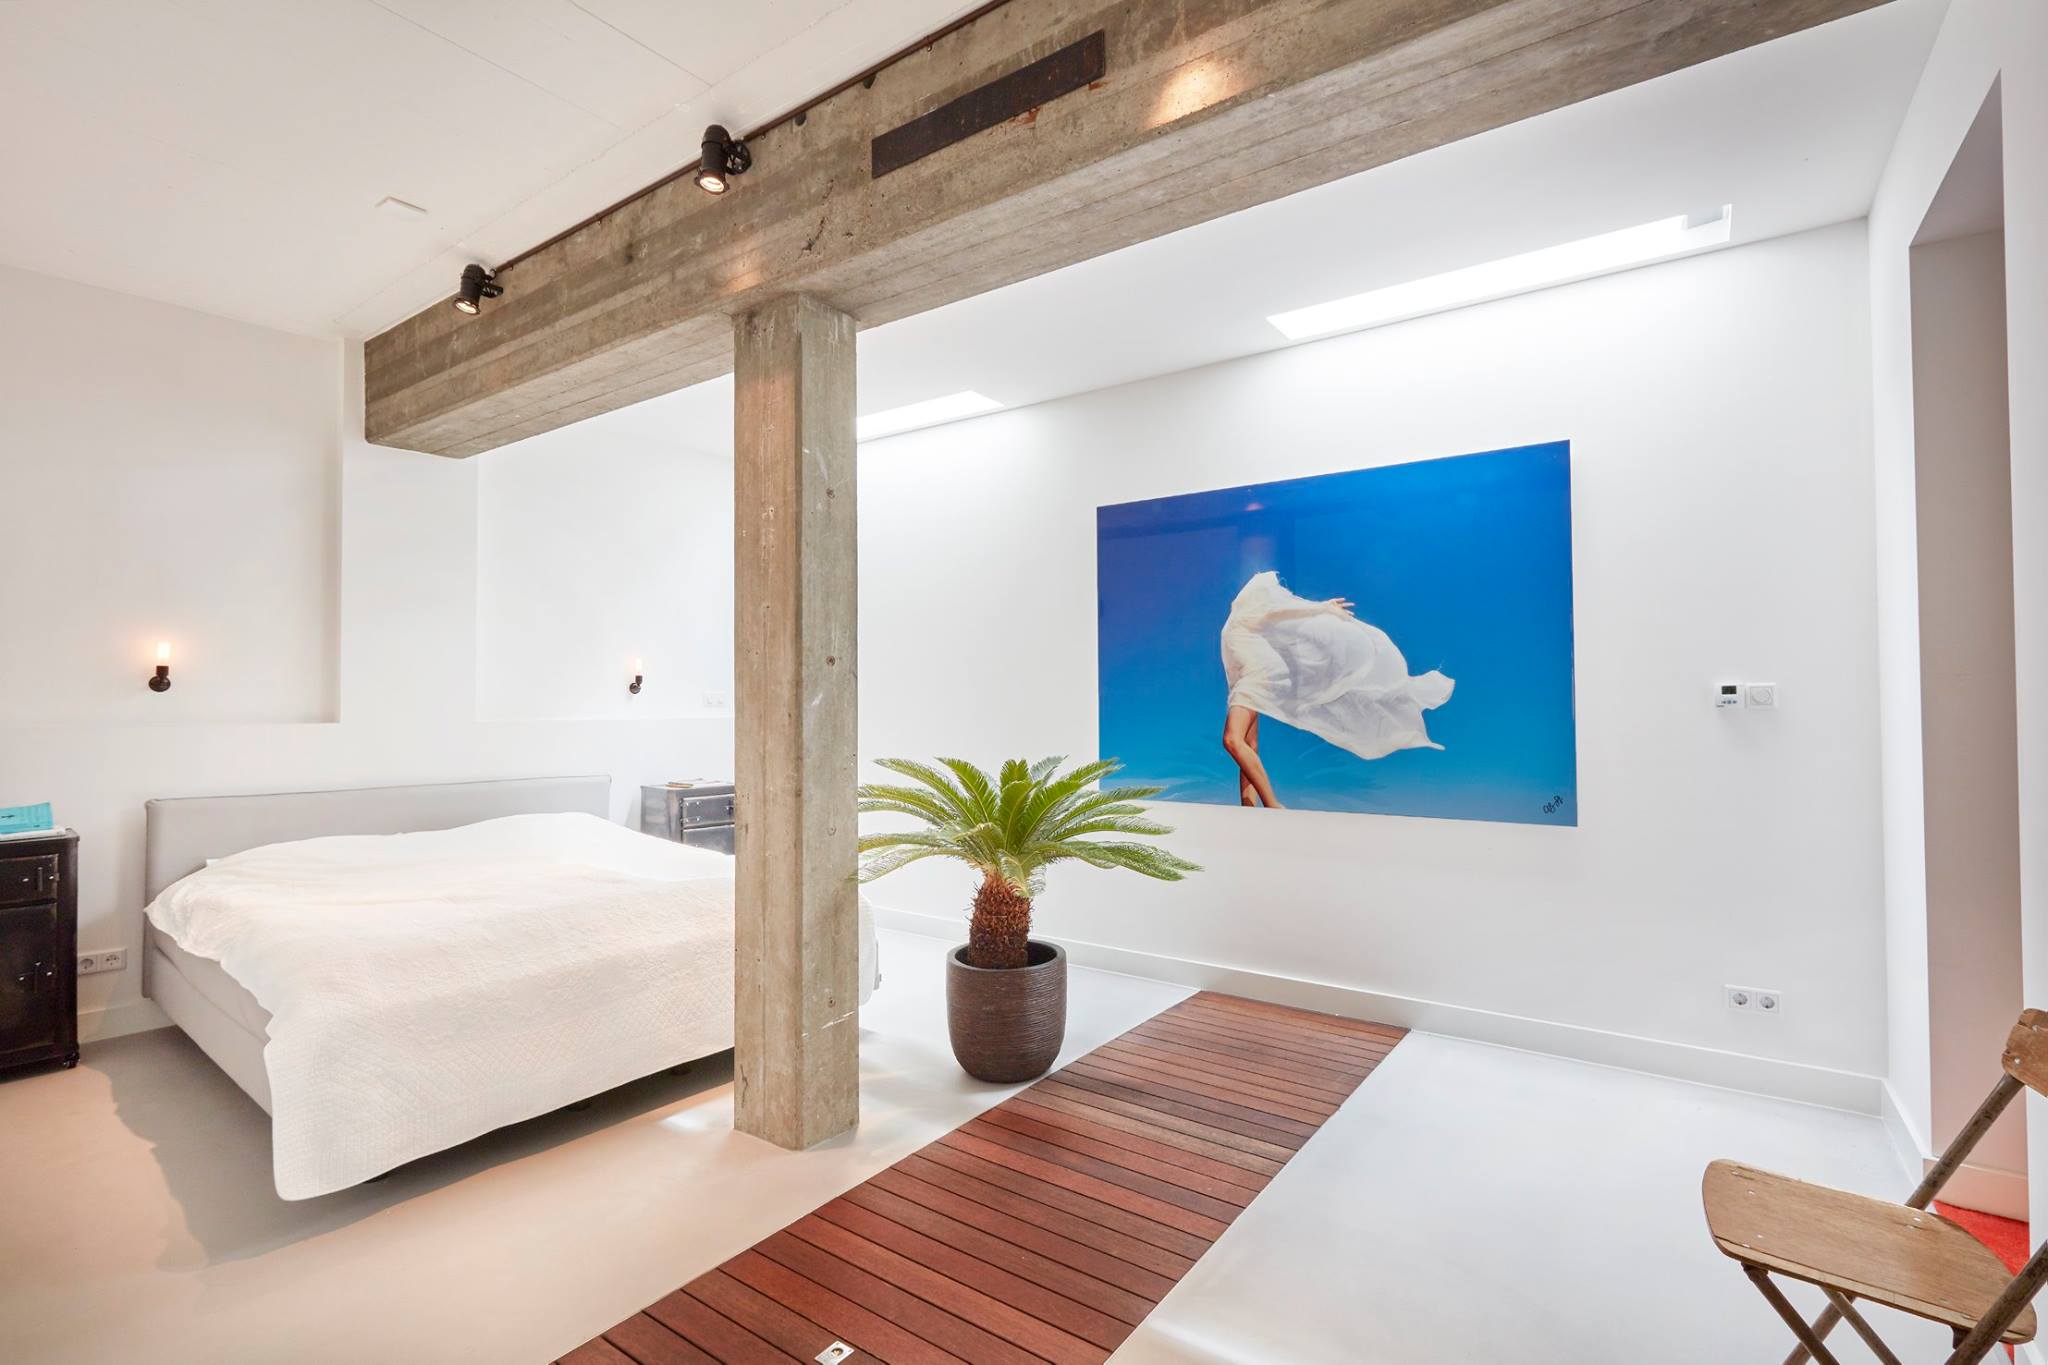 Skylights combined with raw concrete beam and column decorated with palm tree, wooden floor and fantastic art photography. A bespoke and generous master bedroom with meticulous interior design details designed and built by MOST Architecture, Rotterdam